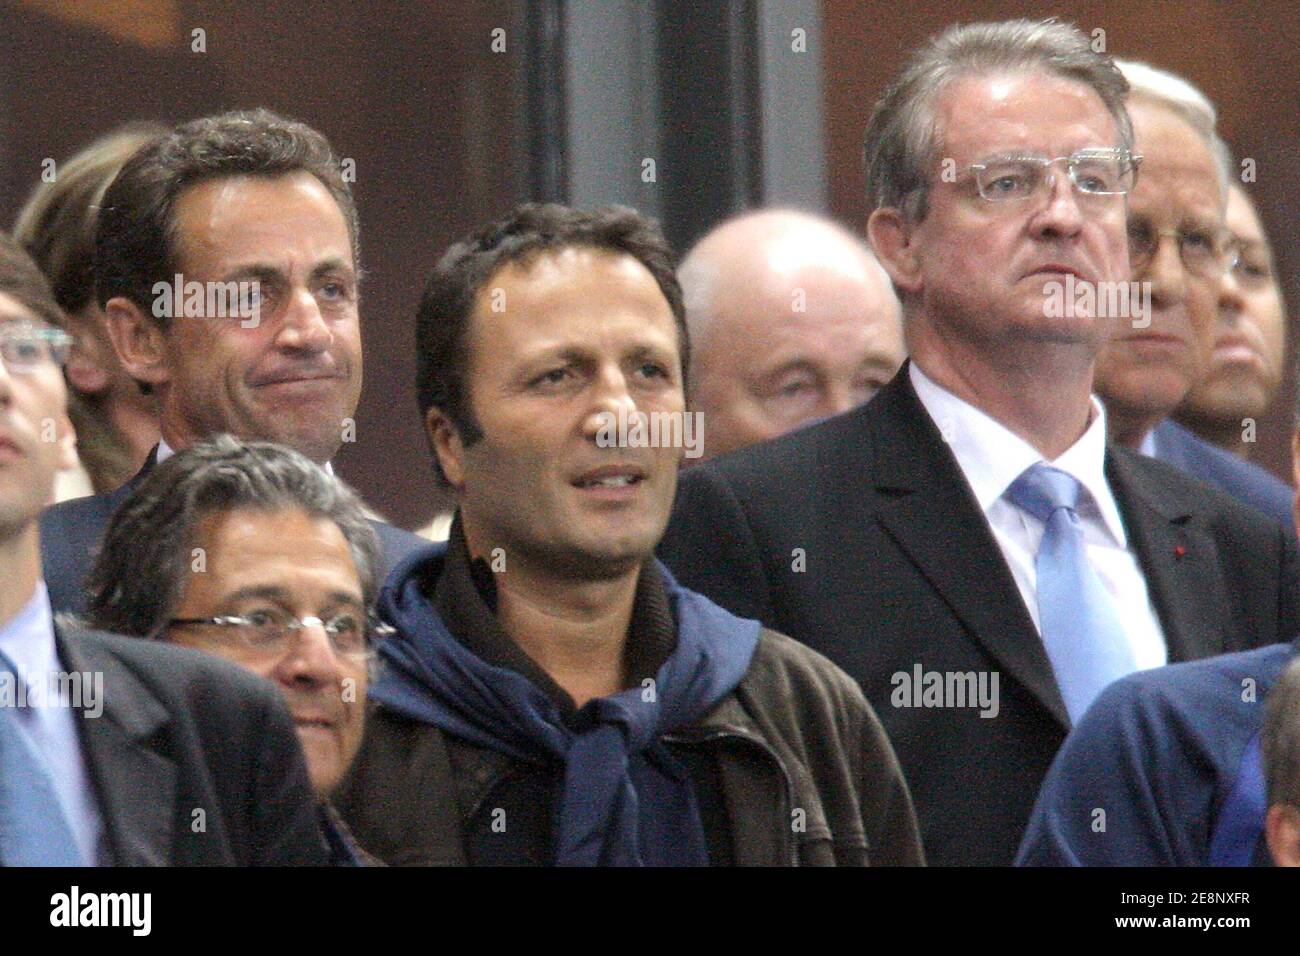 President Nicolas Sarkozy, Christian Clavier, Arthur and FFR president  Bernard Lapasset attend the rugby union World Cup opening match France vs  Argentina at the stade de France in Saint-Denis outside Paris, France